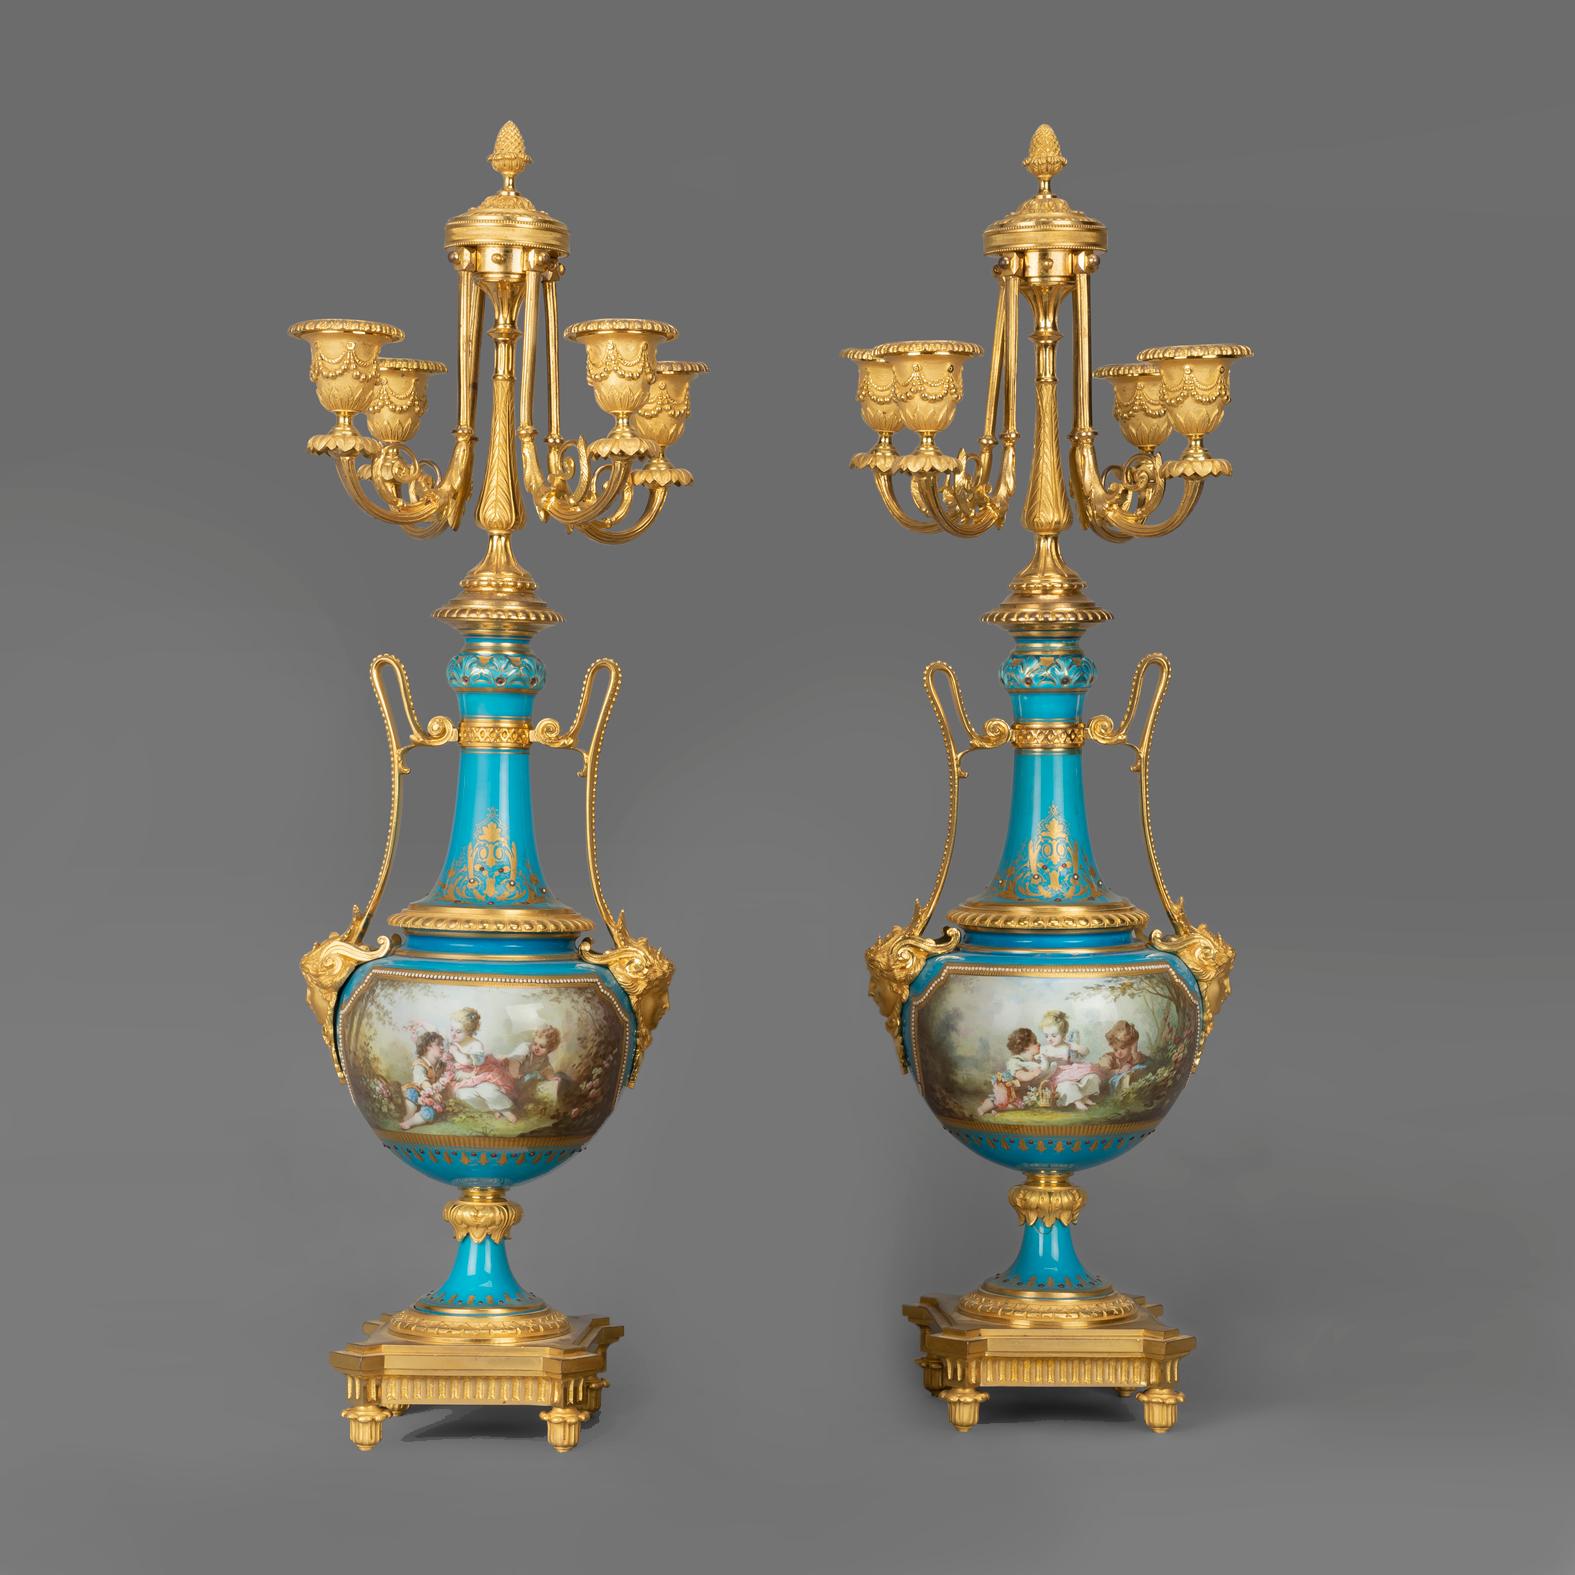 Important Napoléon III Gilt-Bronze and Porcelain Clock Garniture, circa 1870 In Good Condition For Sale In Brighton, West Sussex